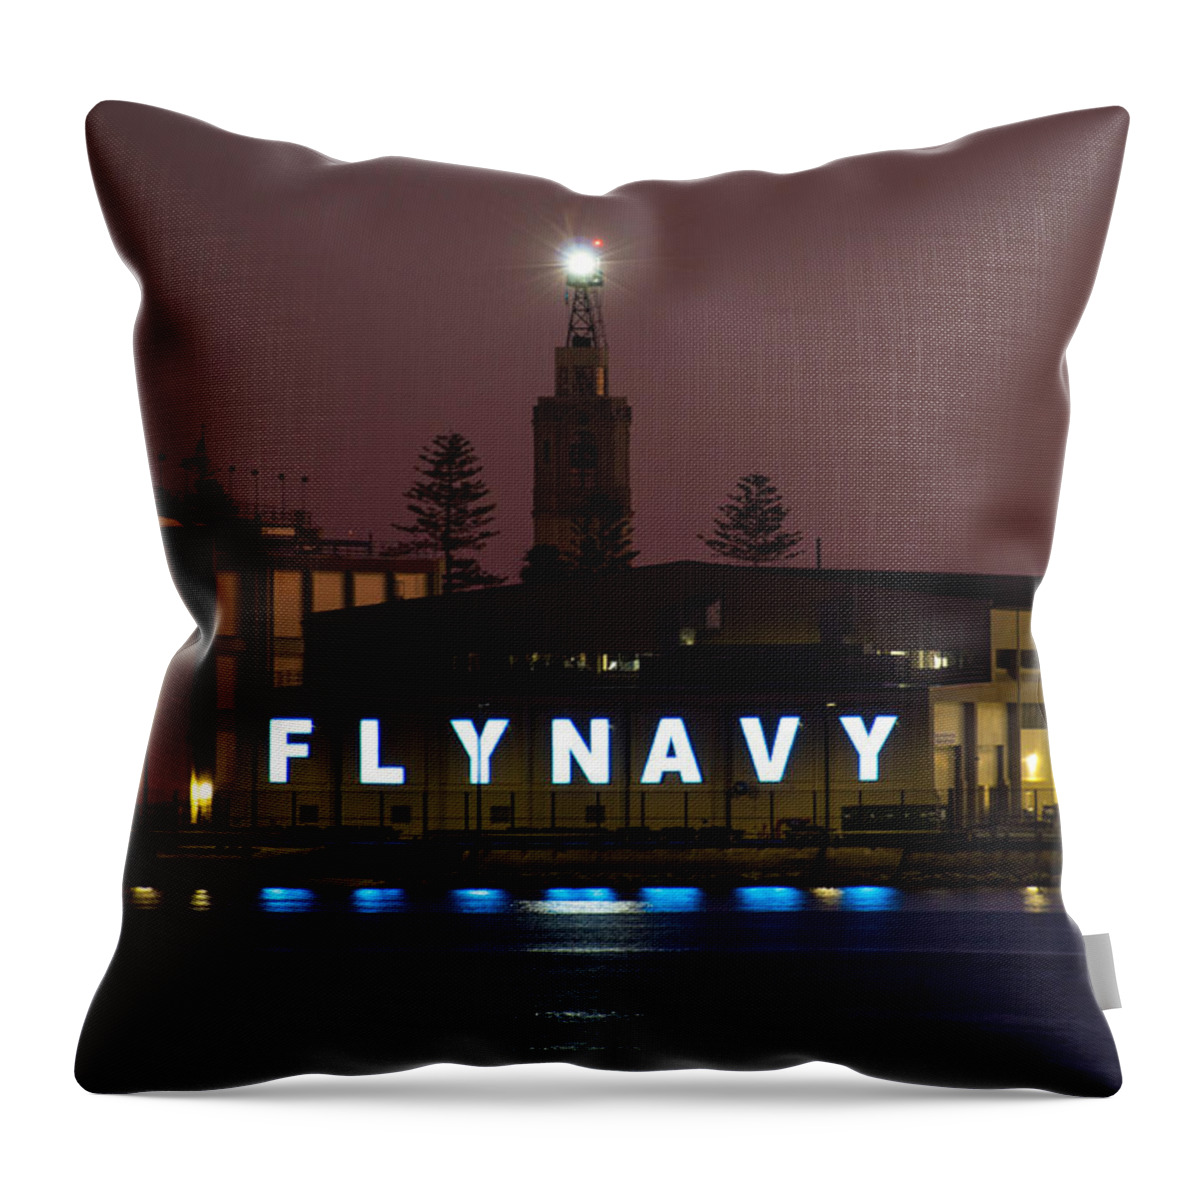 Fly Navy Throw Pillow featuring the photograph Fly Navy by Amanda Rimmer